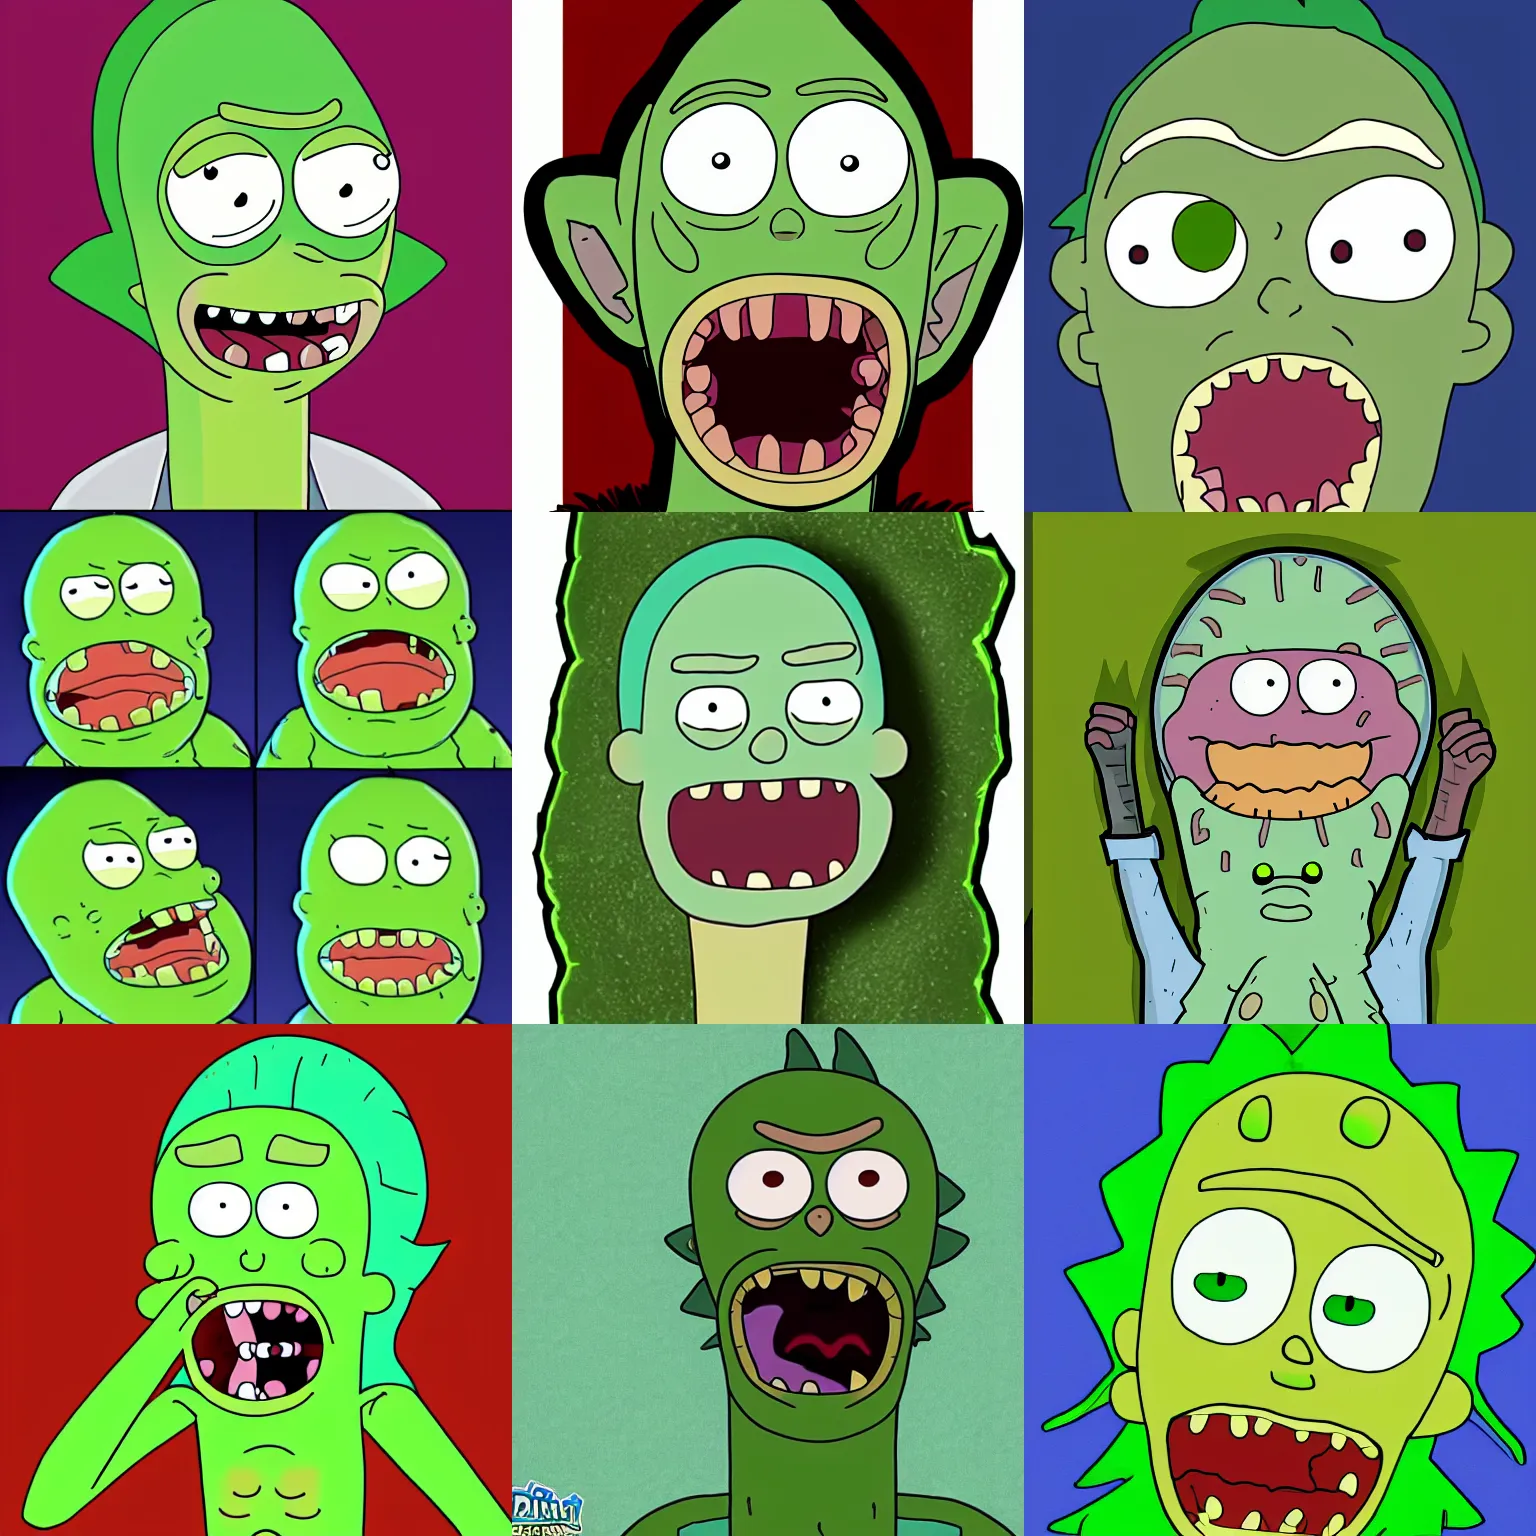 Prompt: pickle rick from rick and morty, cartoon